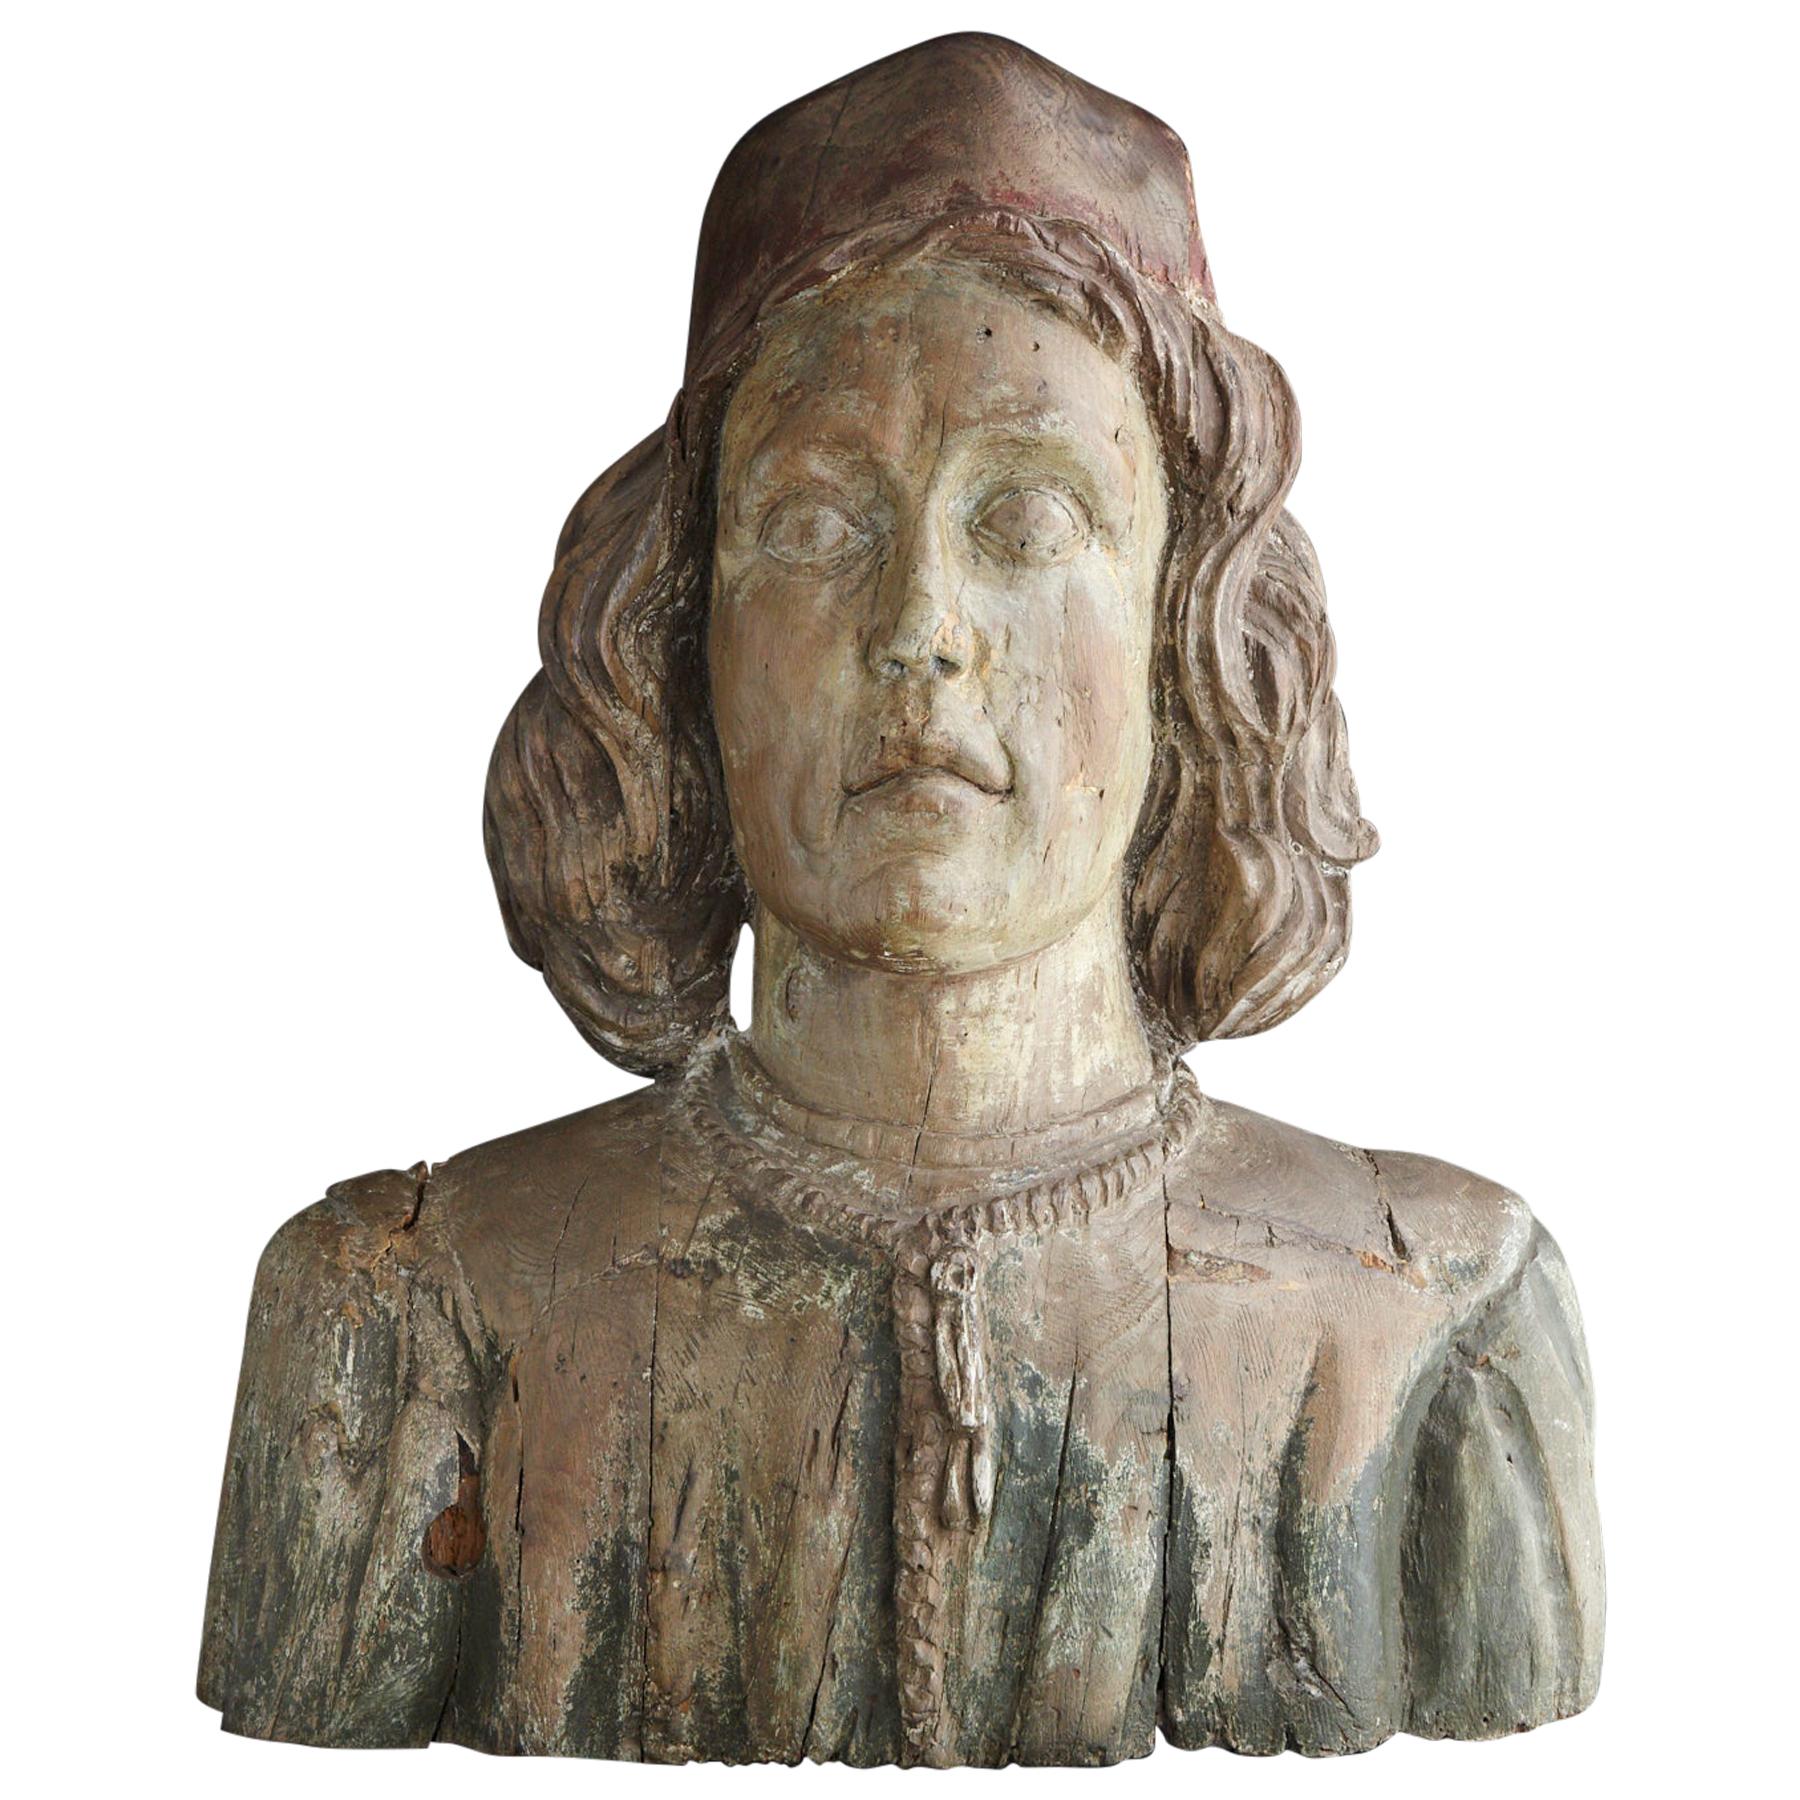 Early 19th Century English Carved Figurehead Depicting the Head of a Merchant